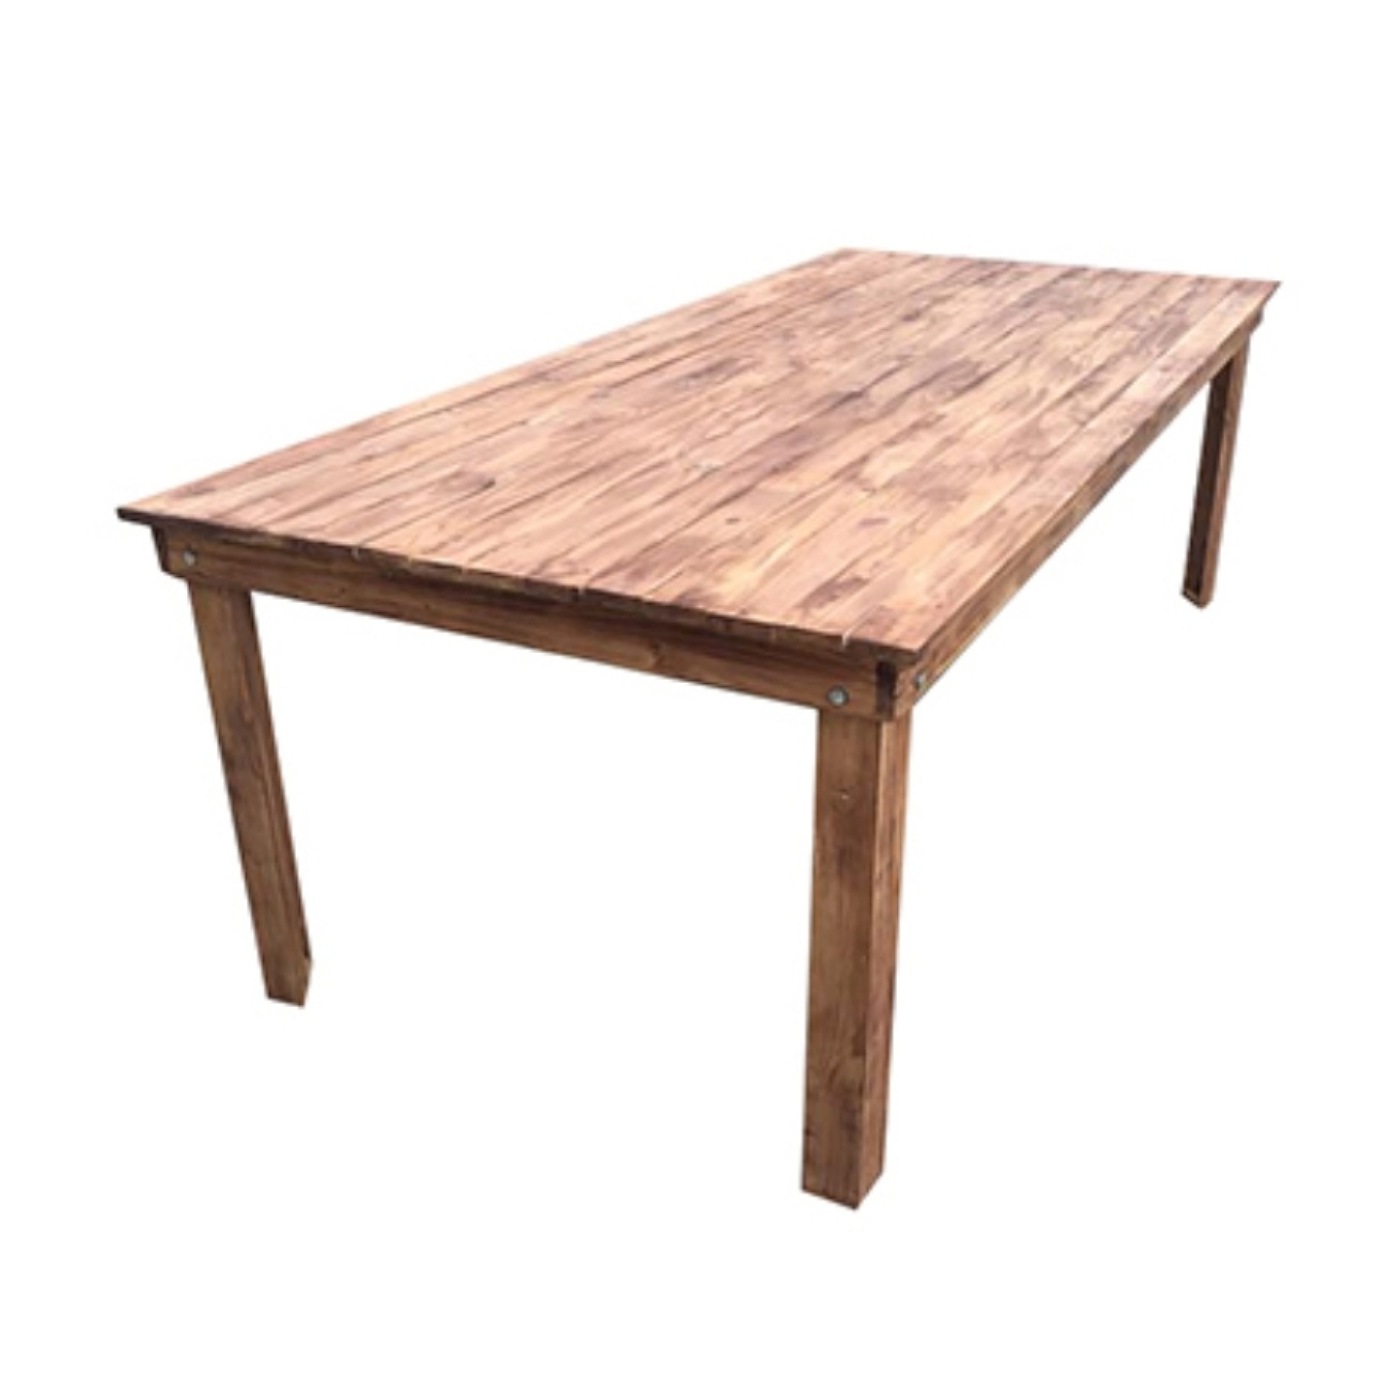 Large Wooden Table 10 Seater.